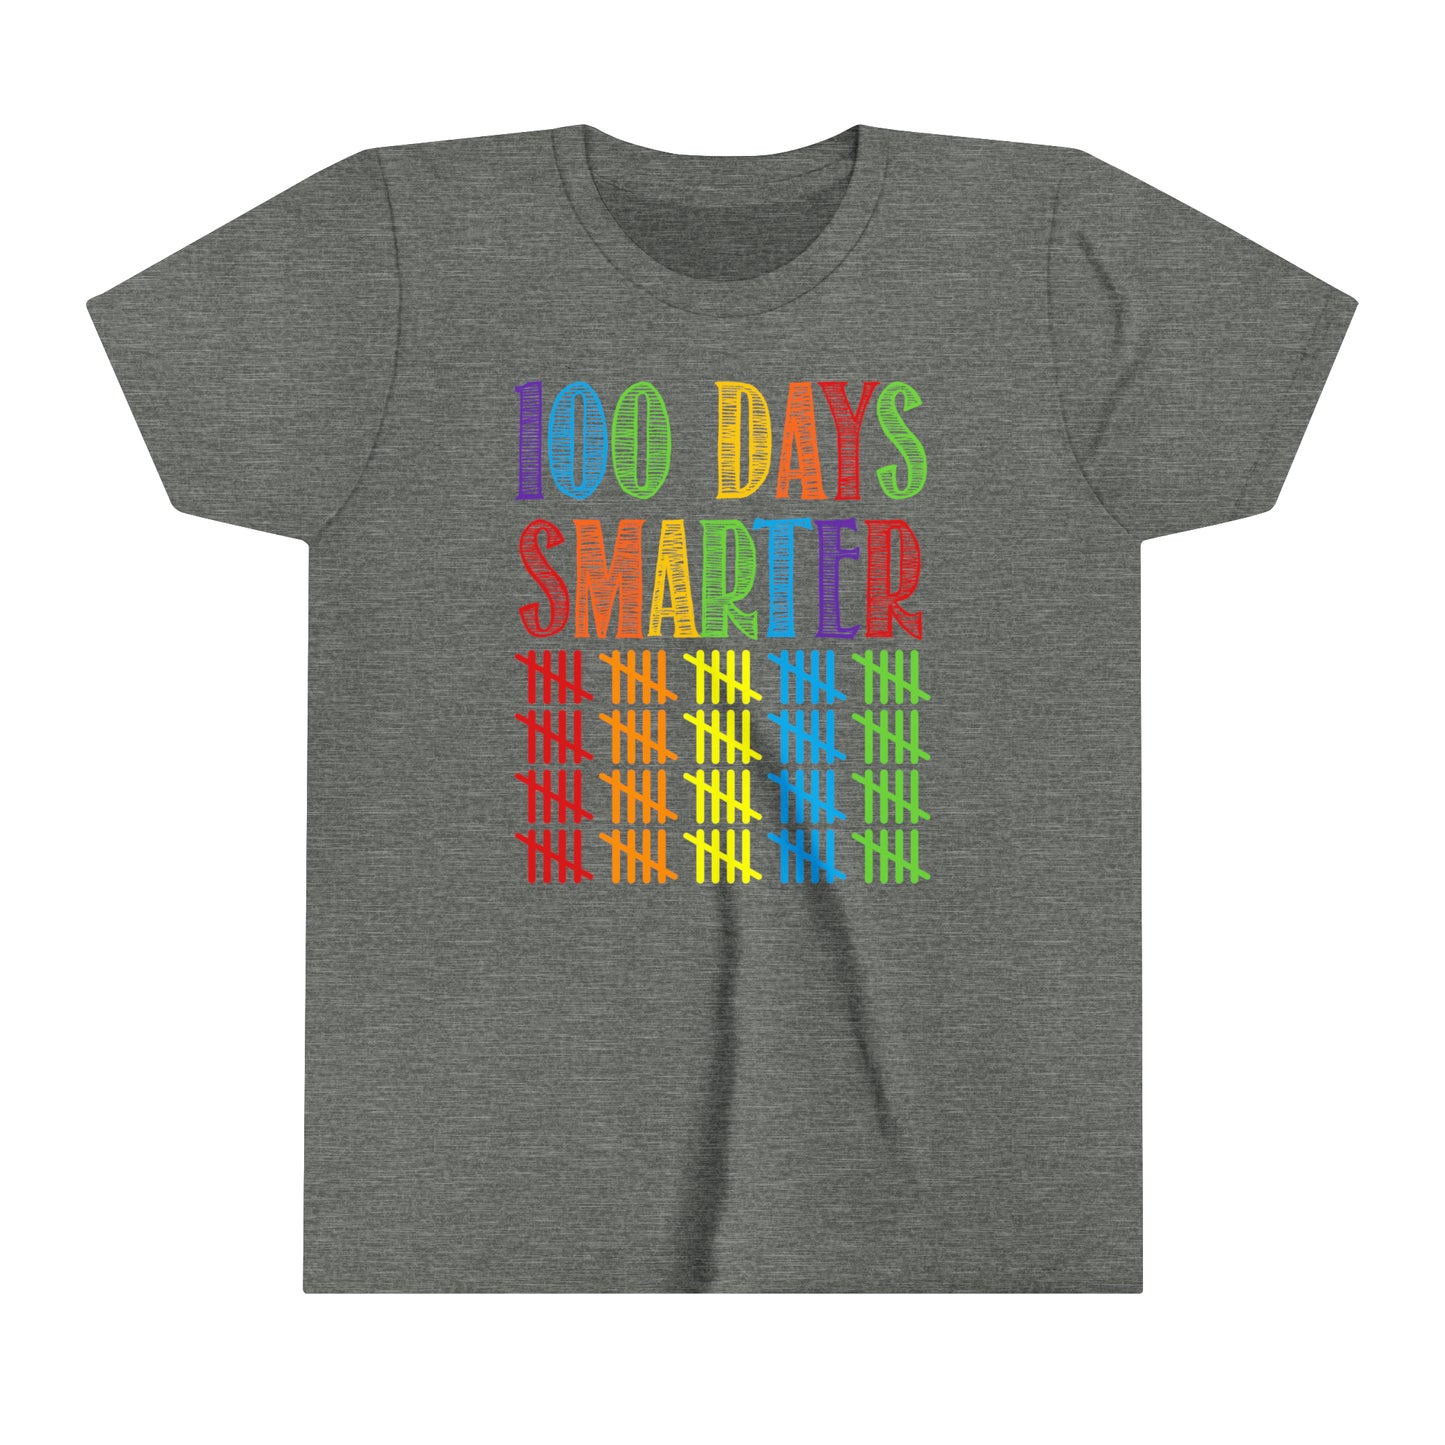 100 Days Smarter 100 Days of School Youth Boy's and Girl's Unisex Short Sleeve Tee